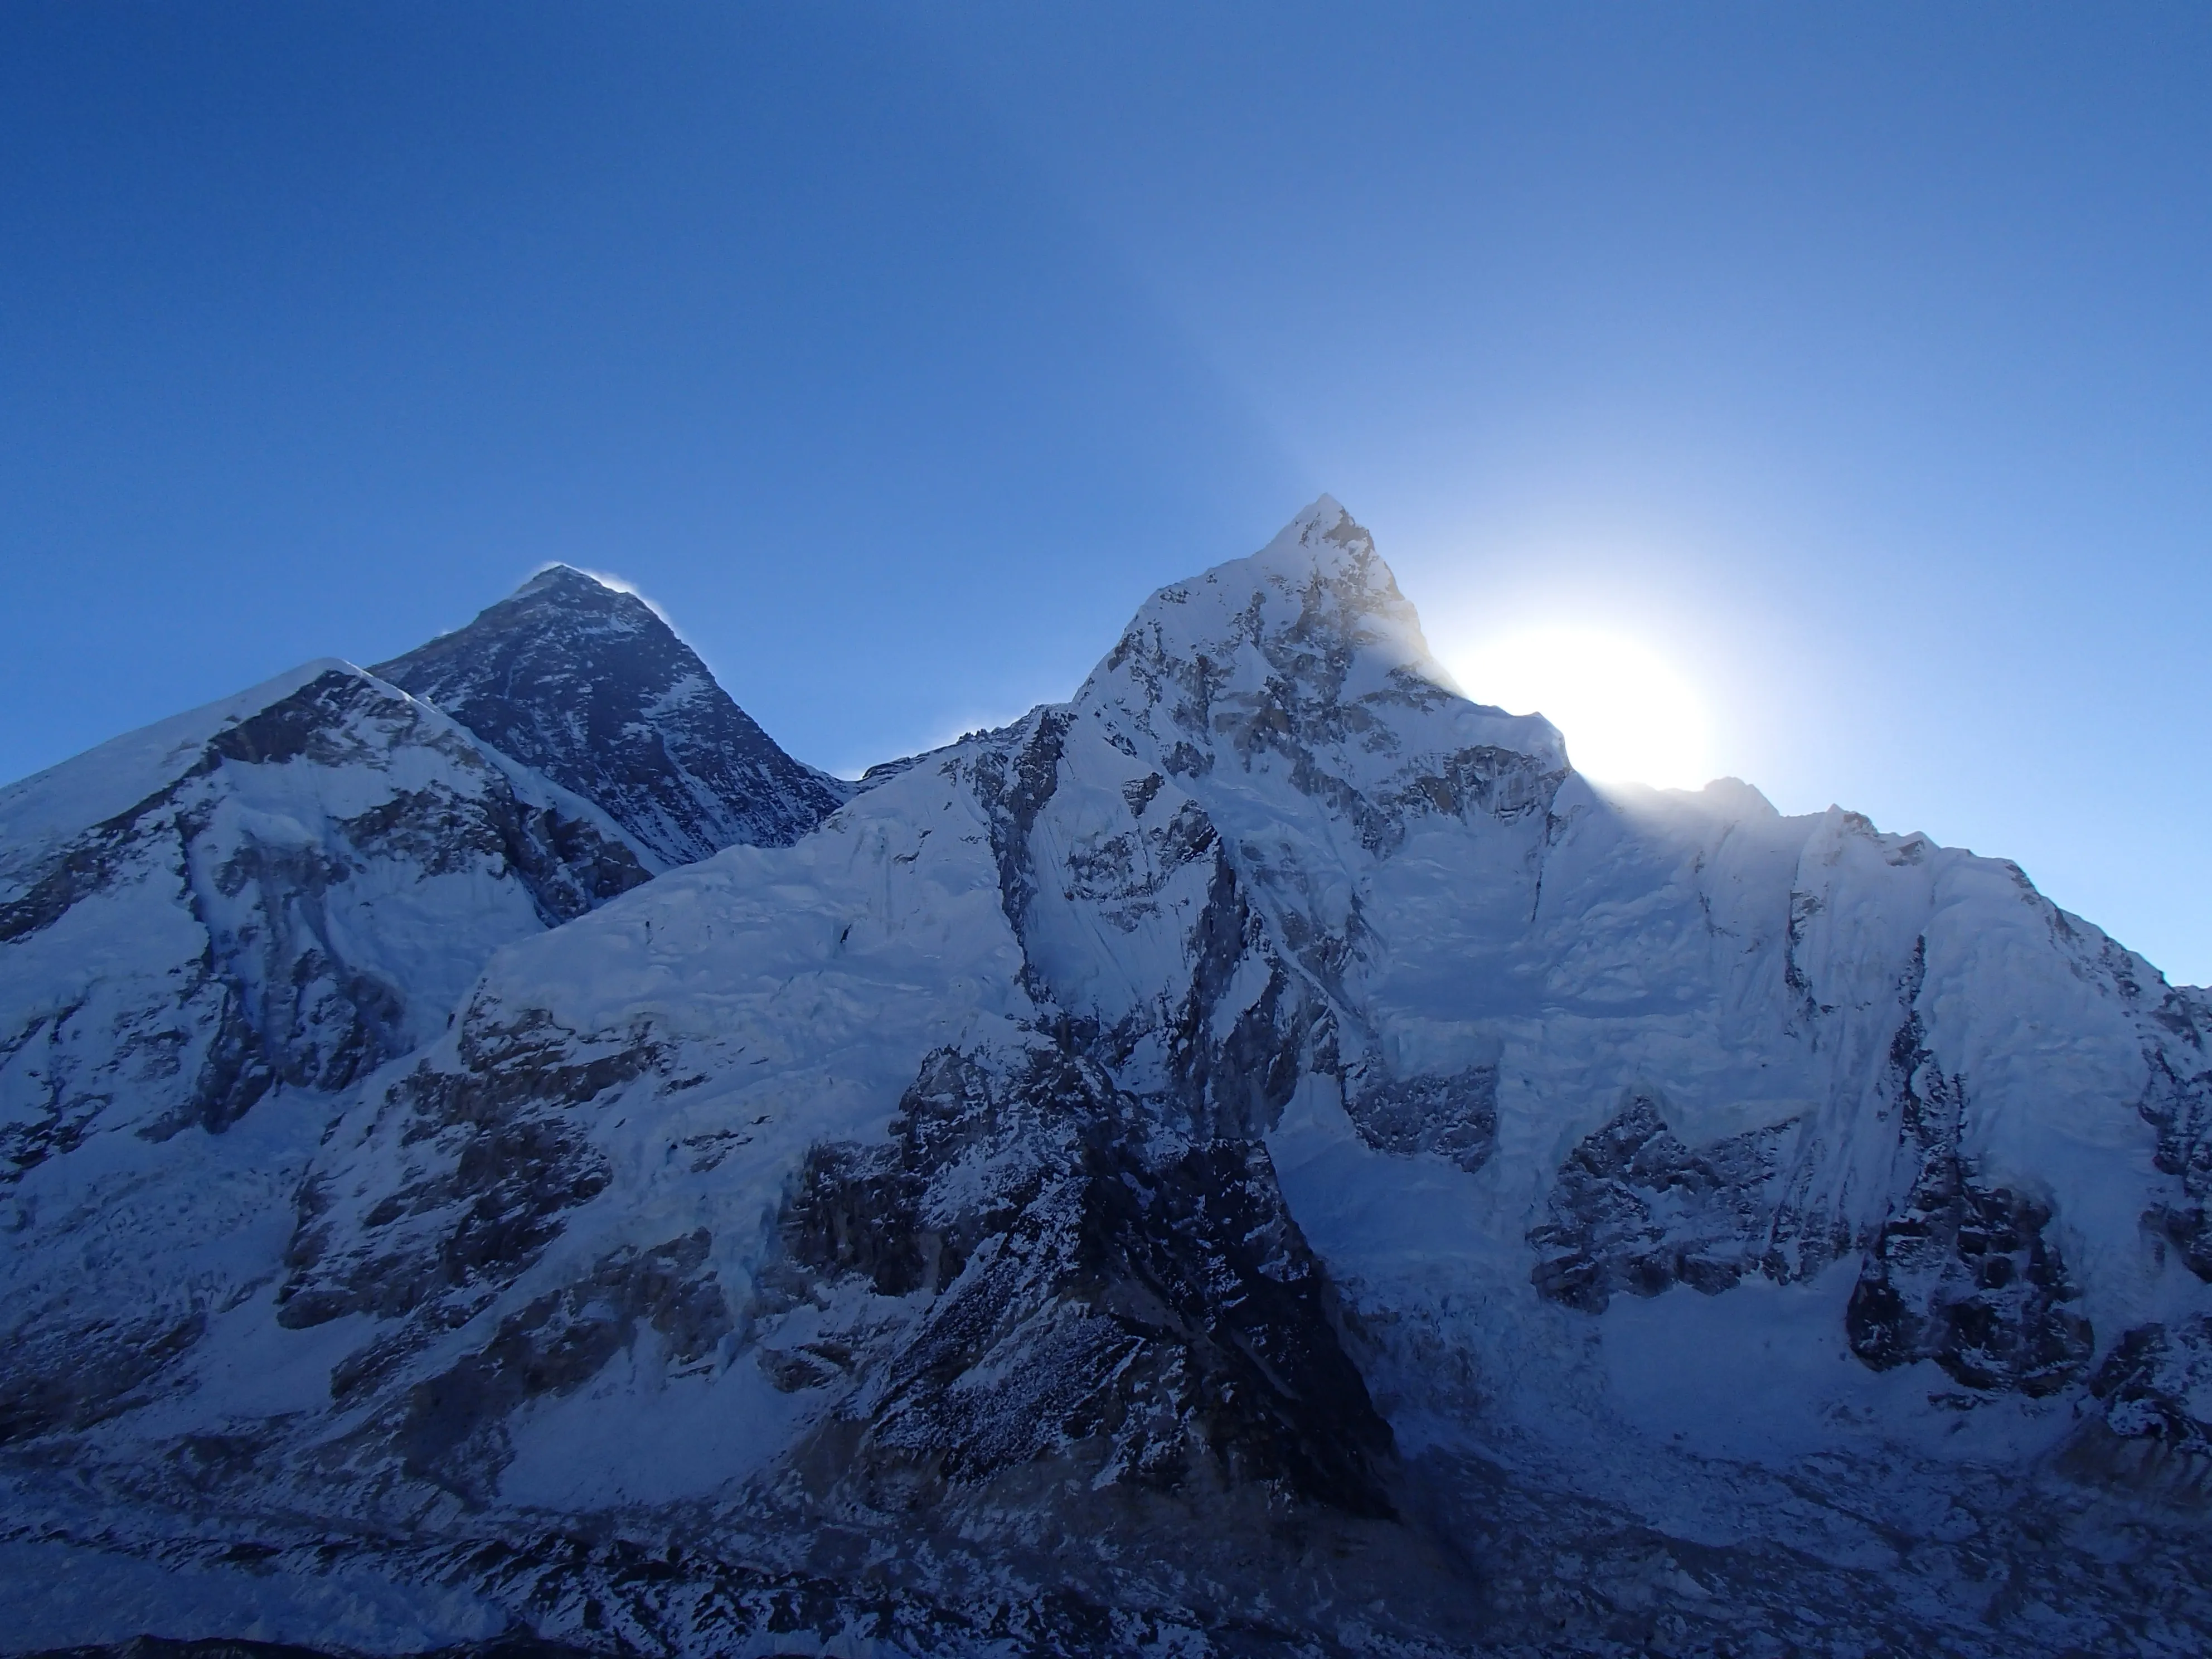 China closed its Everest base camp to tourists from Tibet Side